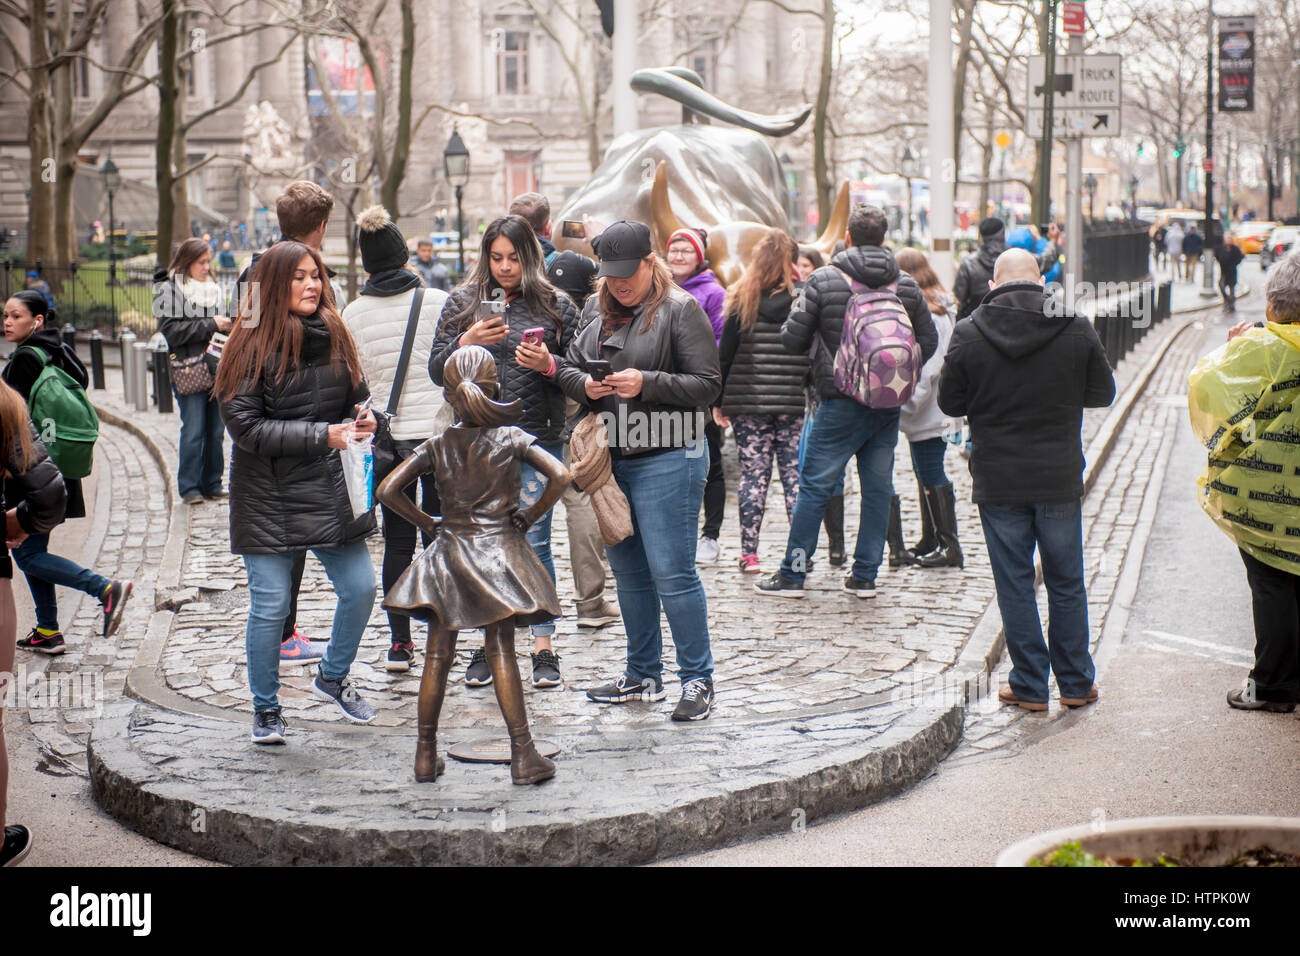 The bronze statue, 'The Fearless Girl' by the artist Kristen Visbal attracted attention at Bowling Green Park in New York on its first day, Tuesday, March 7, 2017. Installed just prior to International Women's Day, it is a campaign by State Street Global Advisors (SSGA) to educate the companies that have women in executive positions perform better and to call on the 3500 companies that collectively have more than $30 trillion in market capitalization to increase the amount of women on their boards. SSGA has the SPDR®SSGA Gender Diversity Index ETF trading under the moniker 'SHE'. (© Richard B. Stock Photo